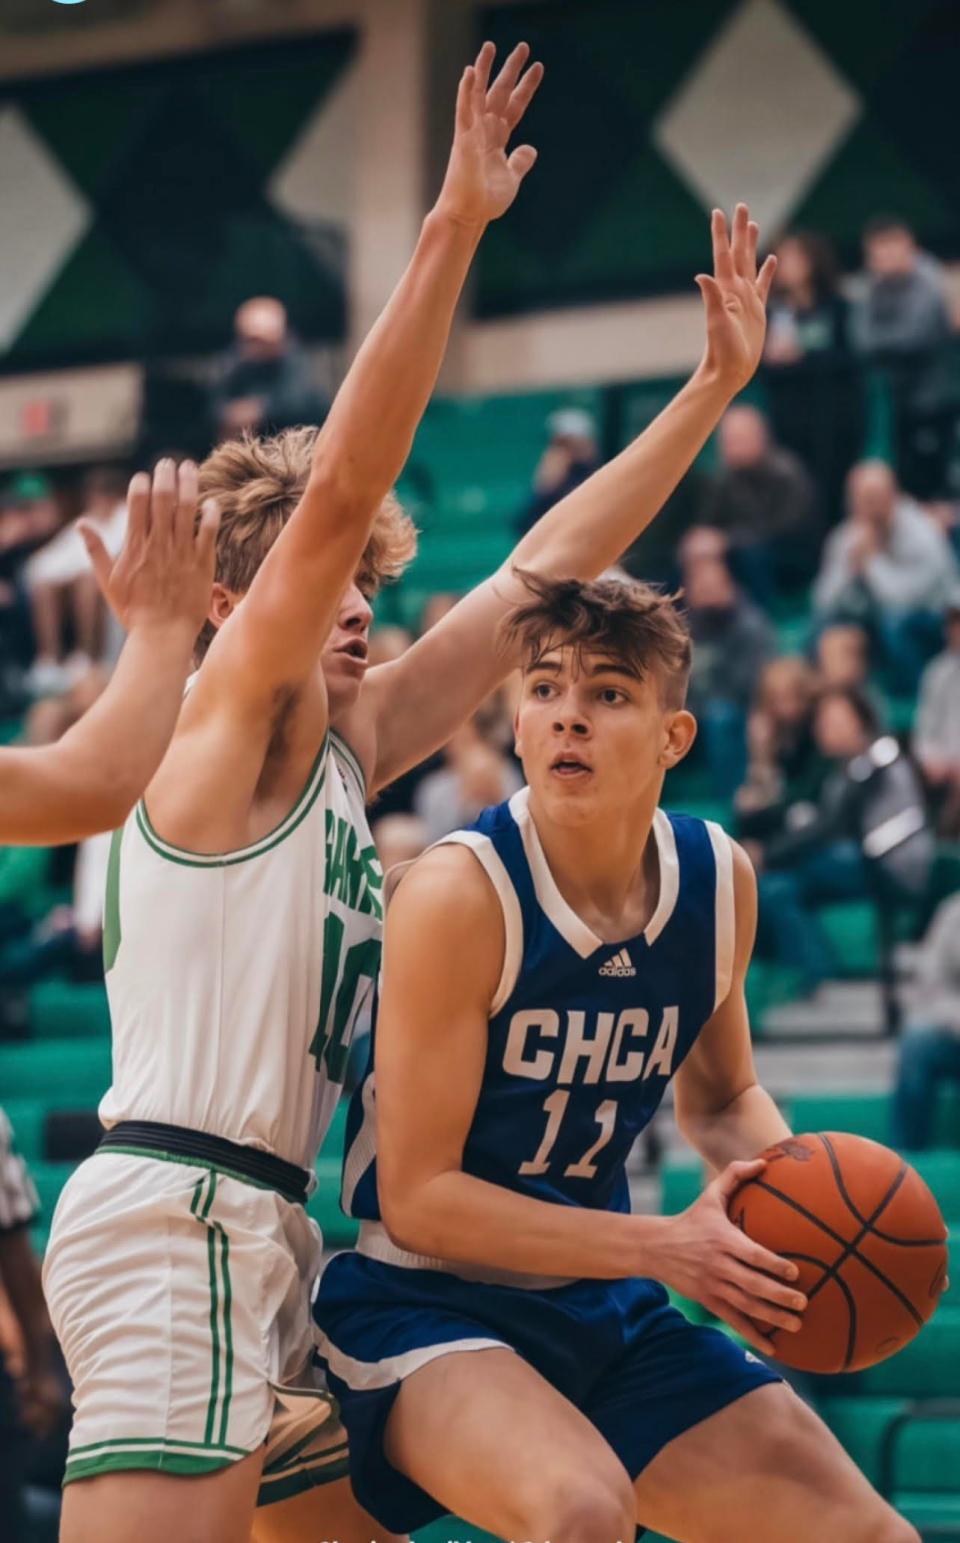 Luke Sanders averages nearly 24 points per game for CHCA.